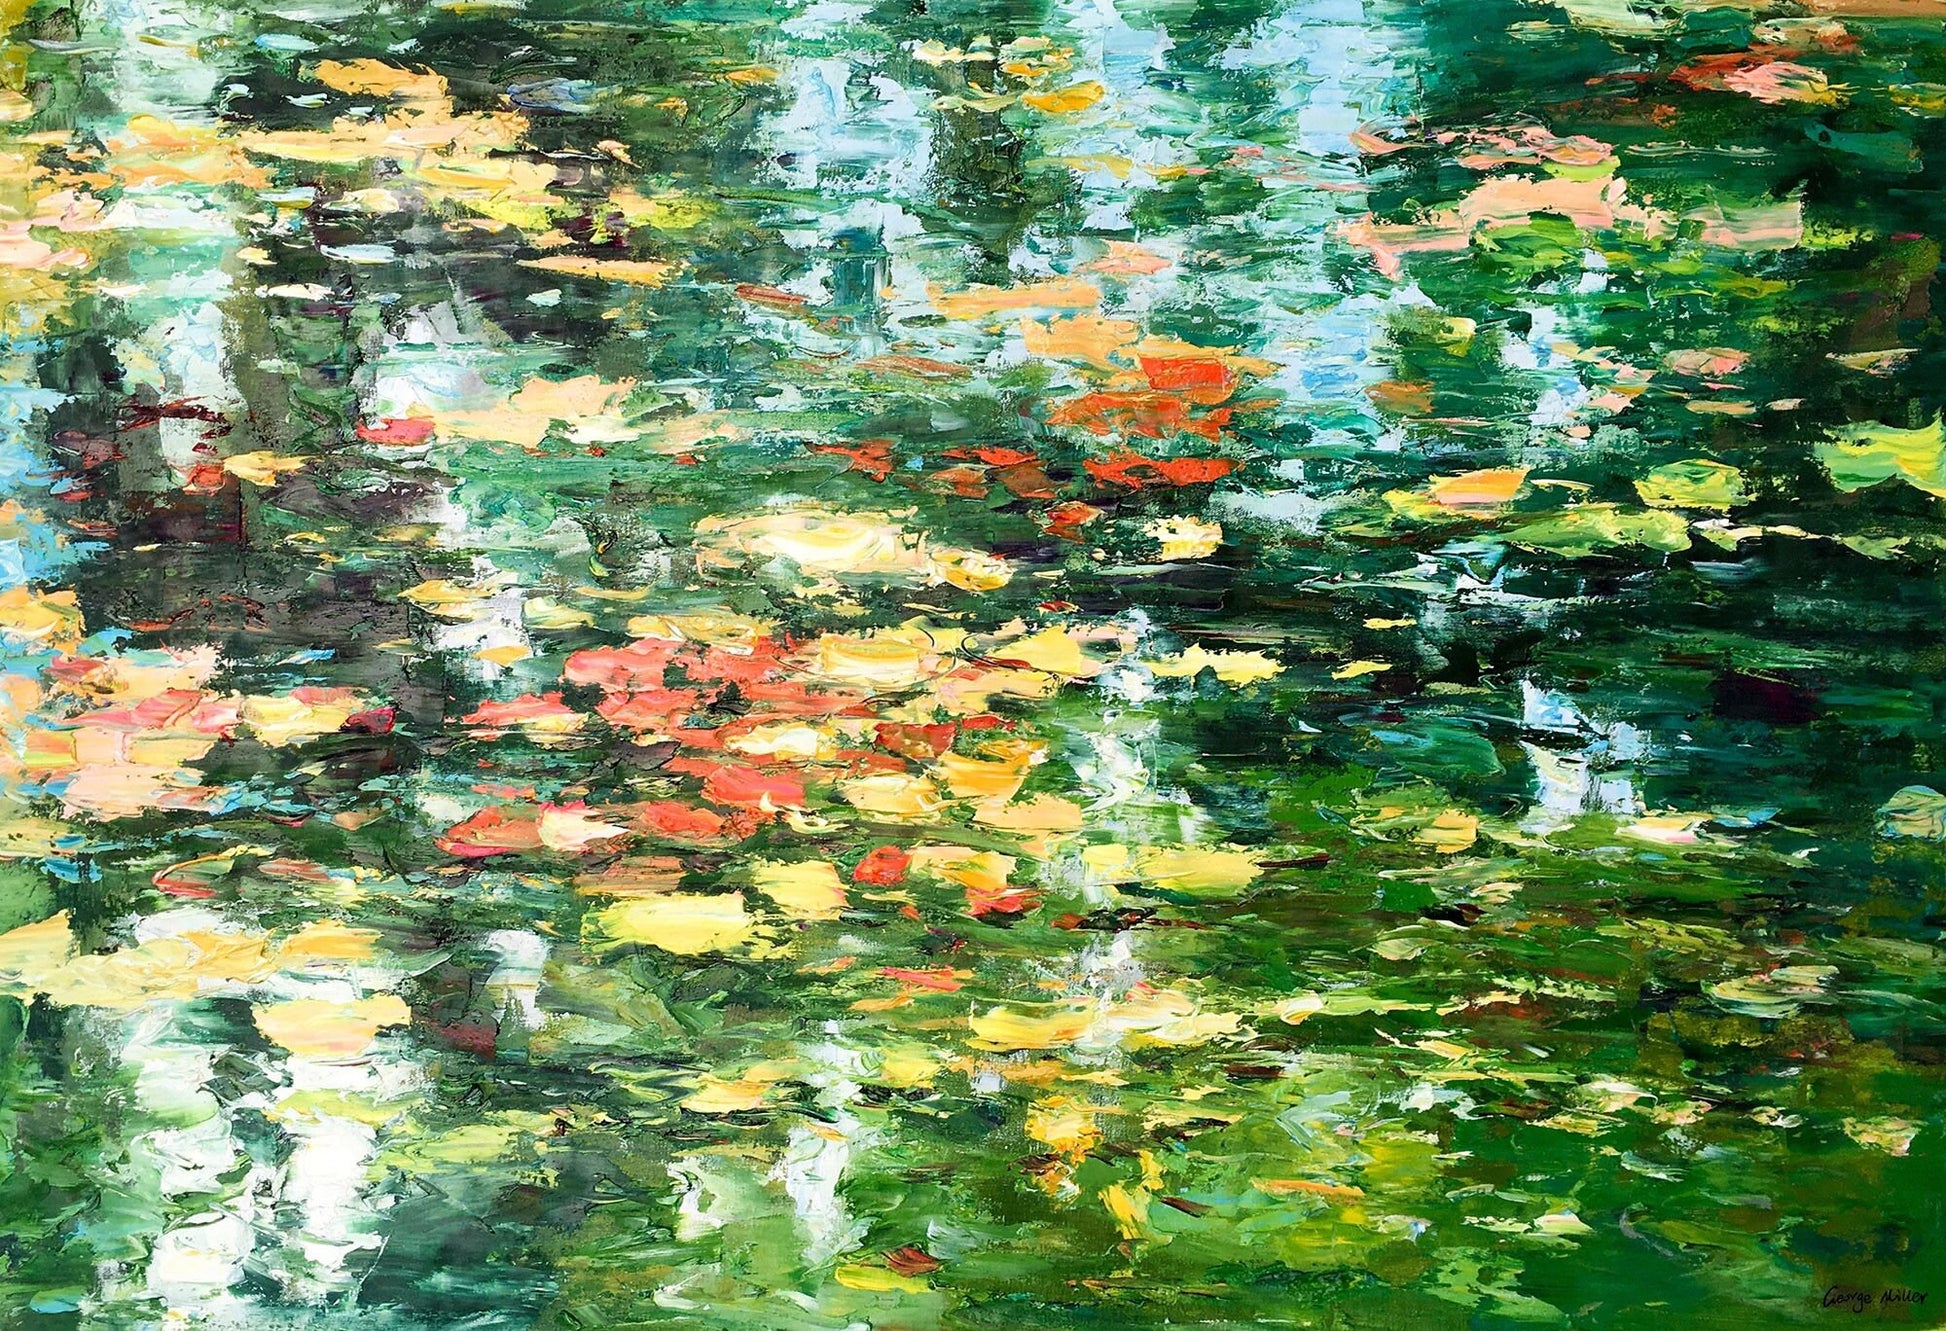 Contemporary Painting Waterlily Pond, Canvas Wall Art, Canvas Painting, Oil Painting Original, Oil Painting Landscape, Abstract Oil Painting